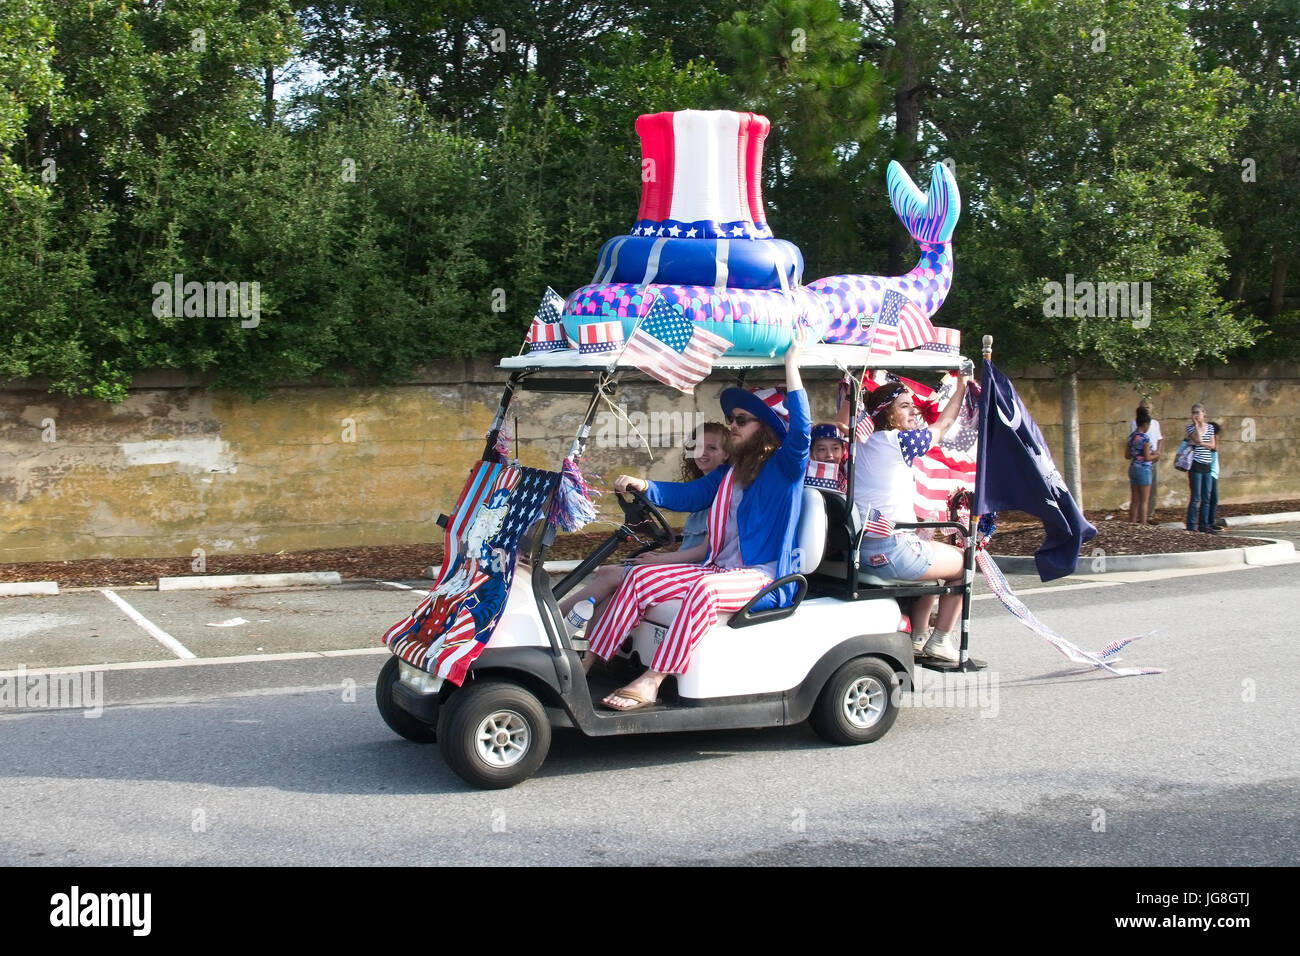 Sullivan's Island, South Carolina, USA. 4th July, 2017. A family rides along in a golf cart decorated in patriotic bunting during the annual Sullivan's Island Independence Day parade July 4, 2017 in Sullivan's Island, South Carolina. The tiny affluent sea island hosts a bicycle and golf cart parade through the historic village. Credit: Planetpix/Alamy Live News Stock Photo